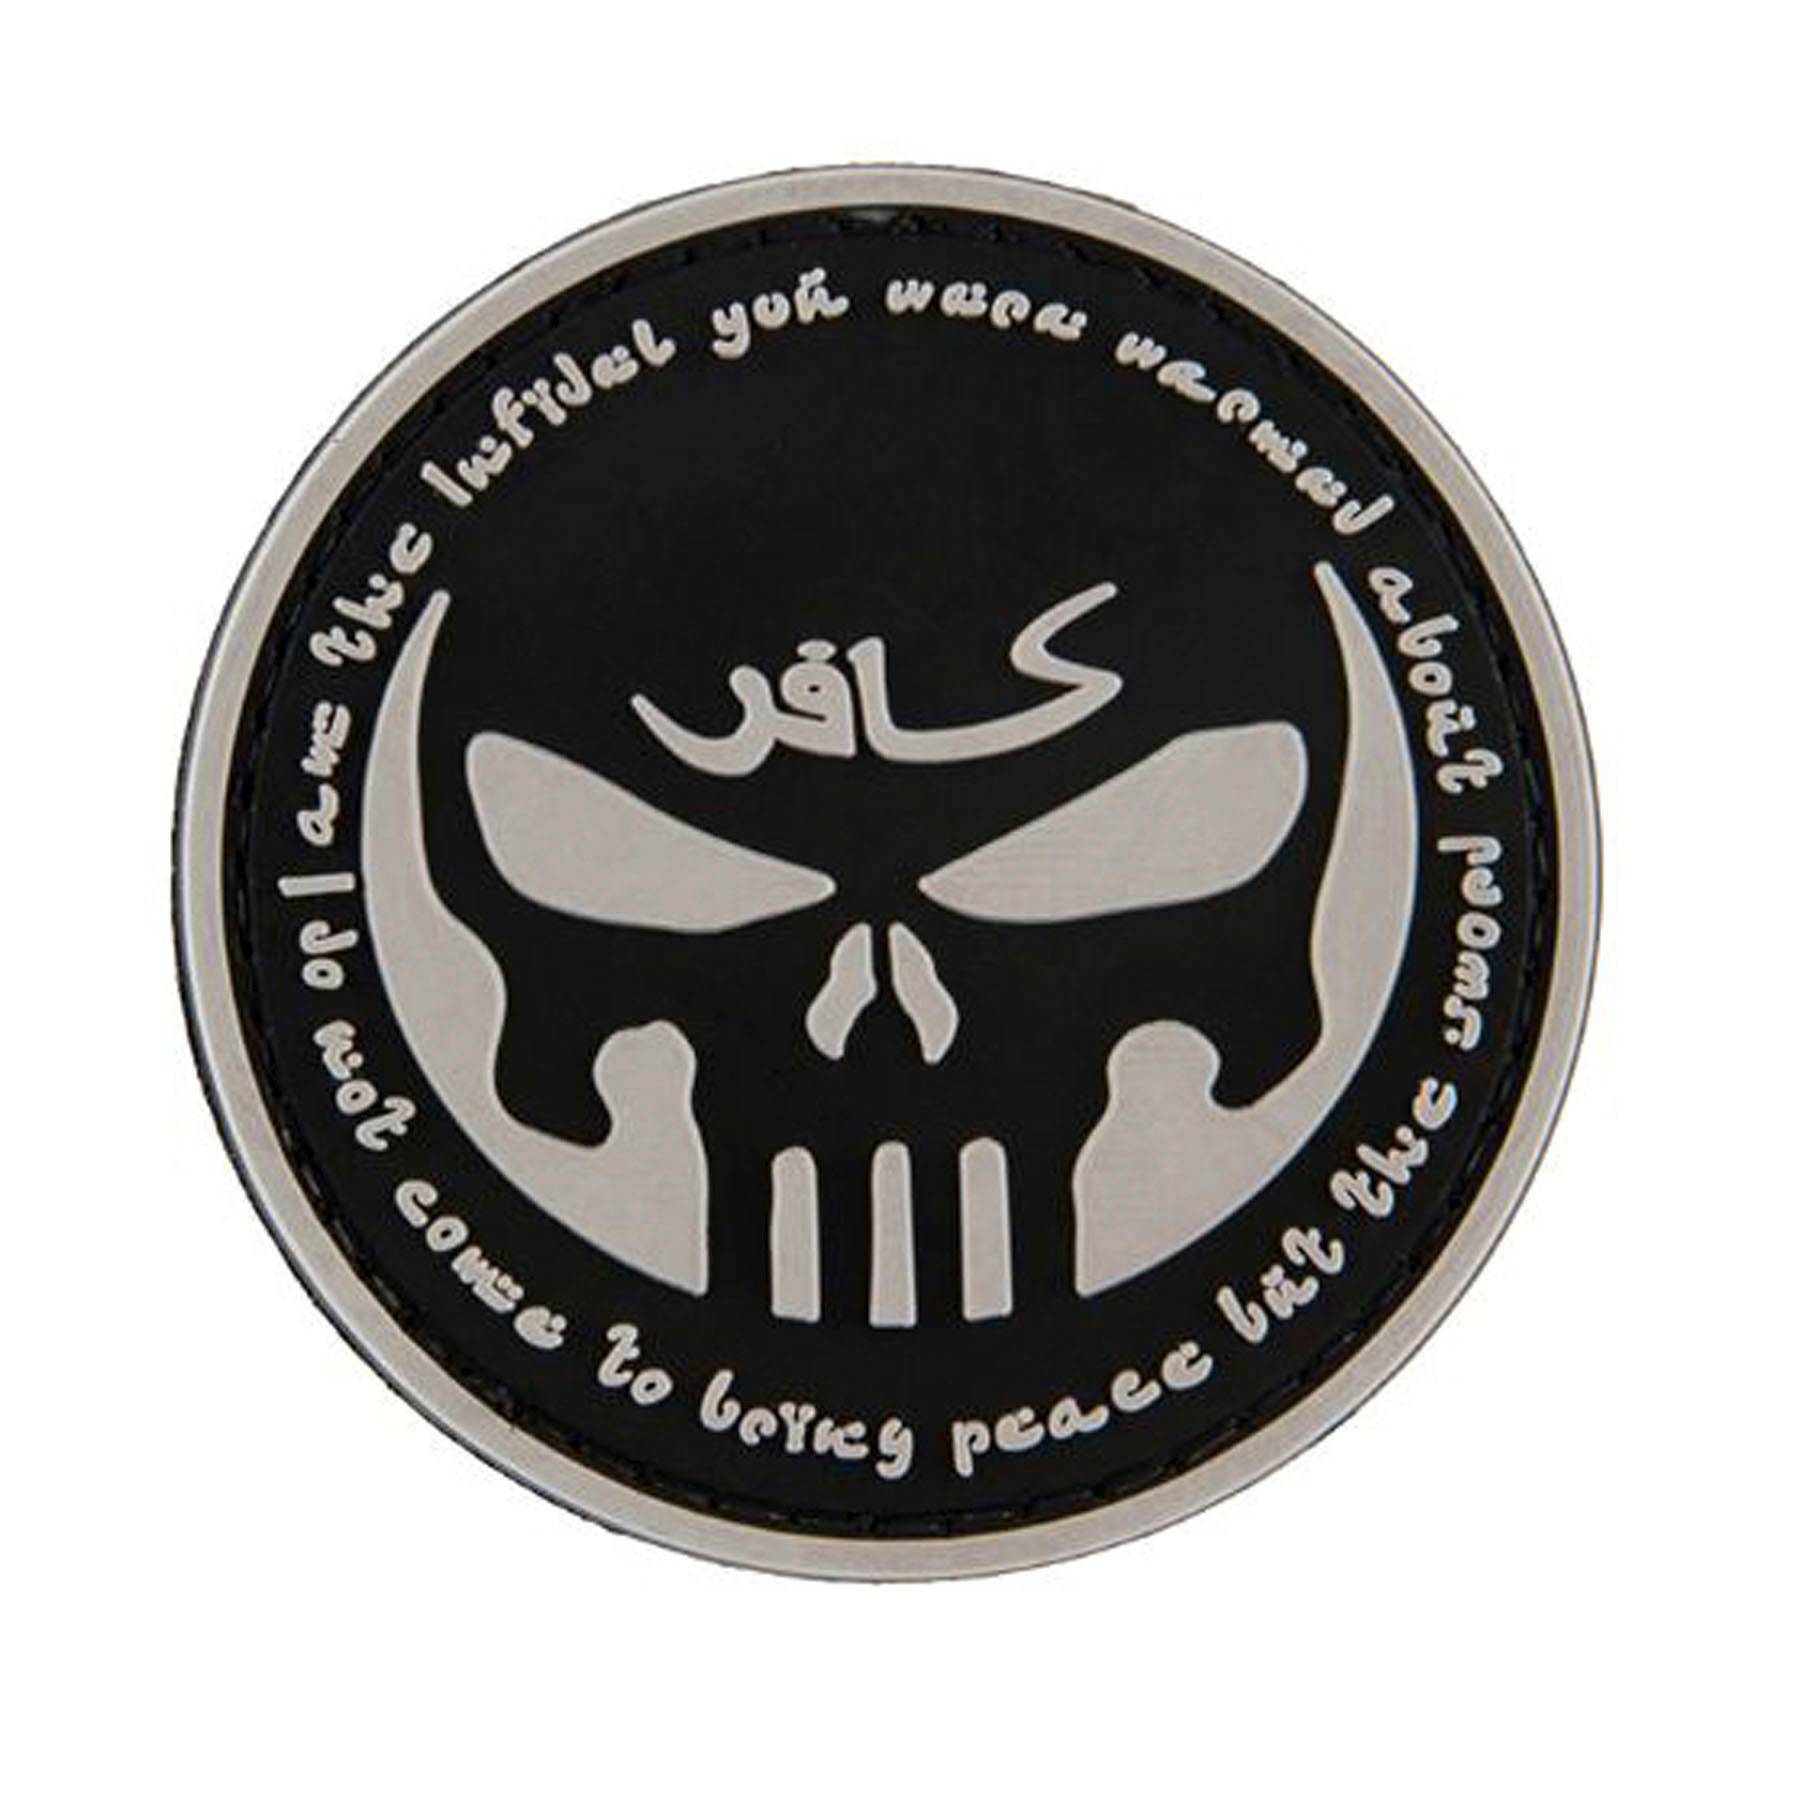 339 - VELCRO PATCH - The Punisher, Patches